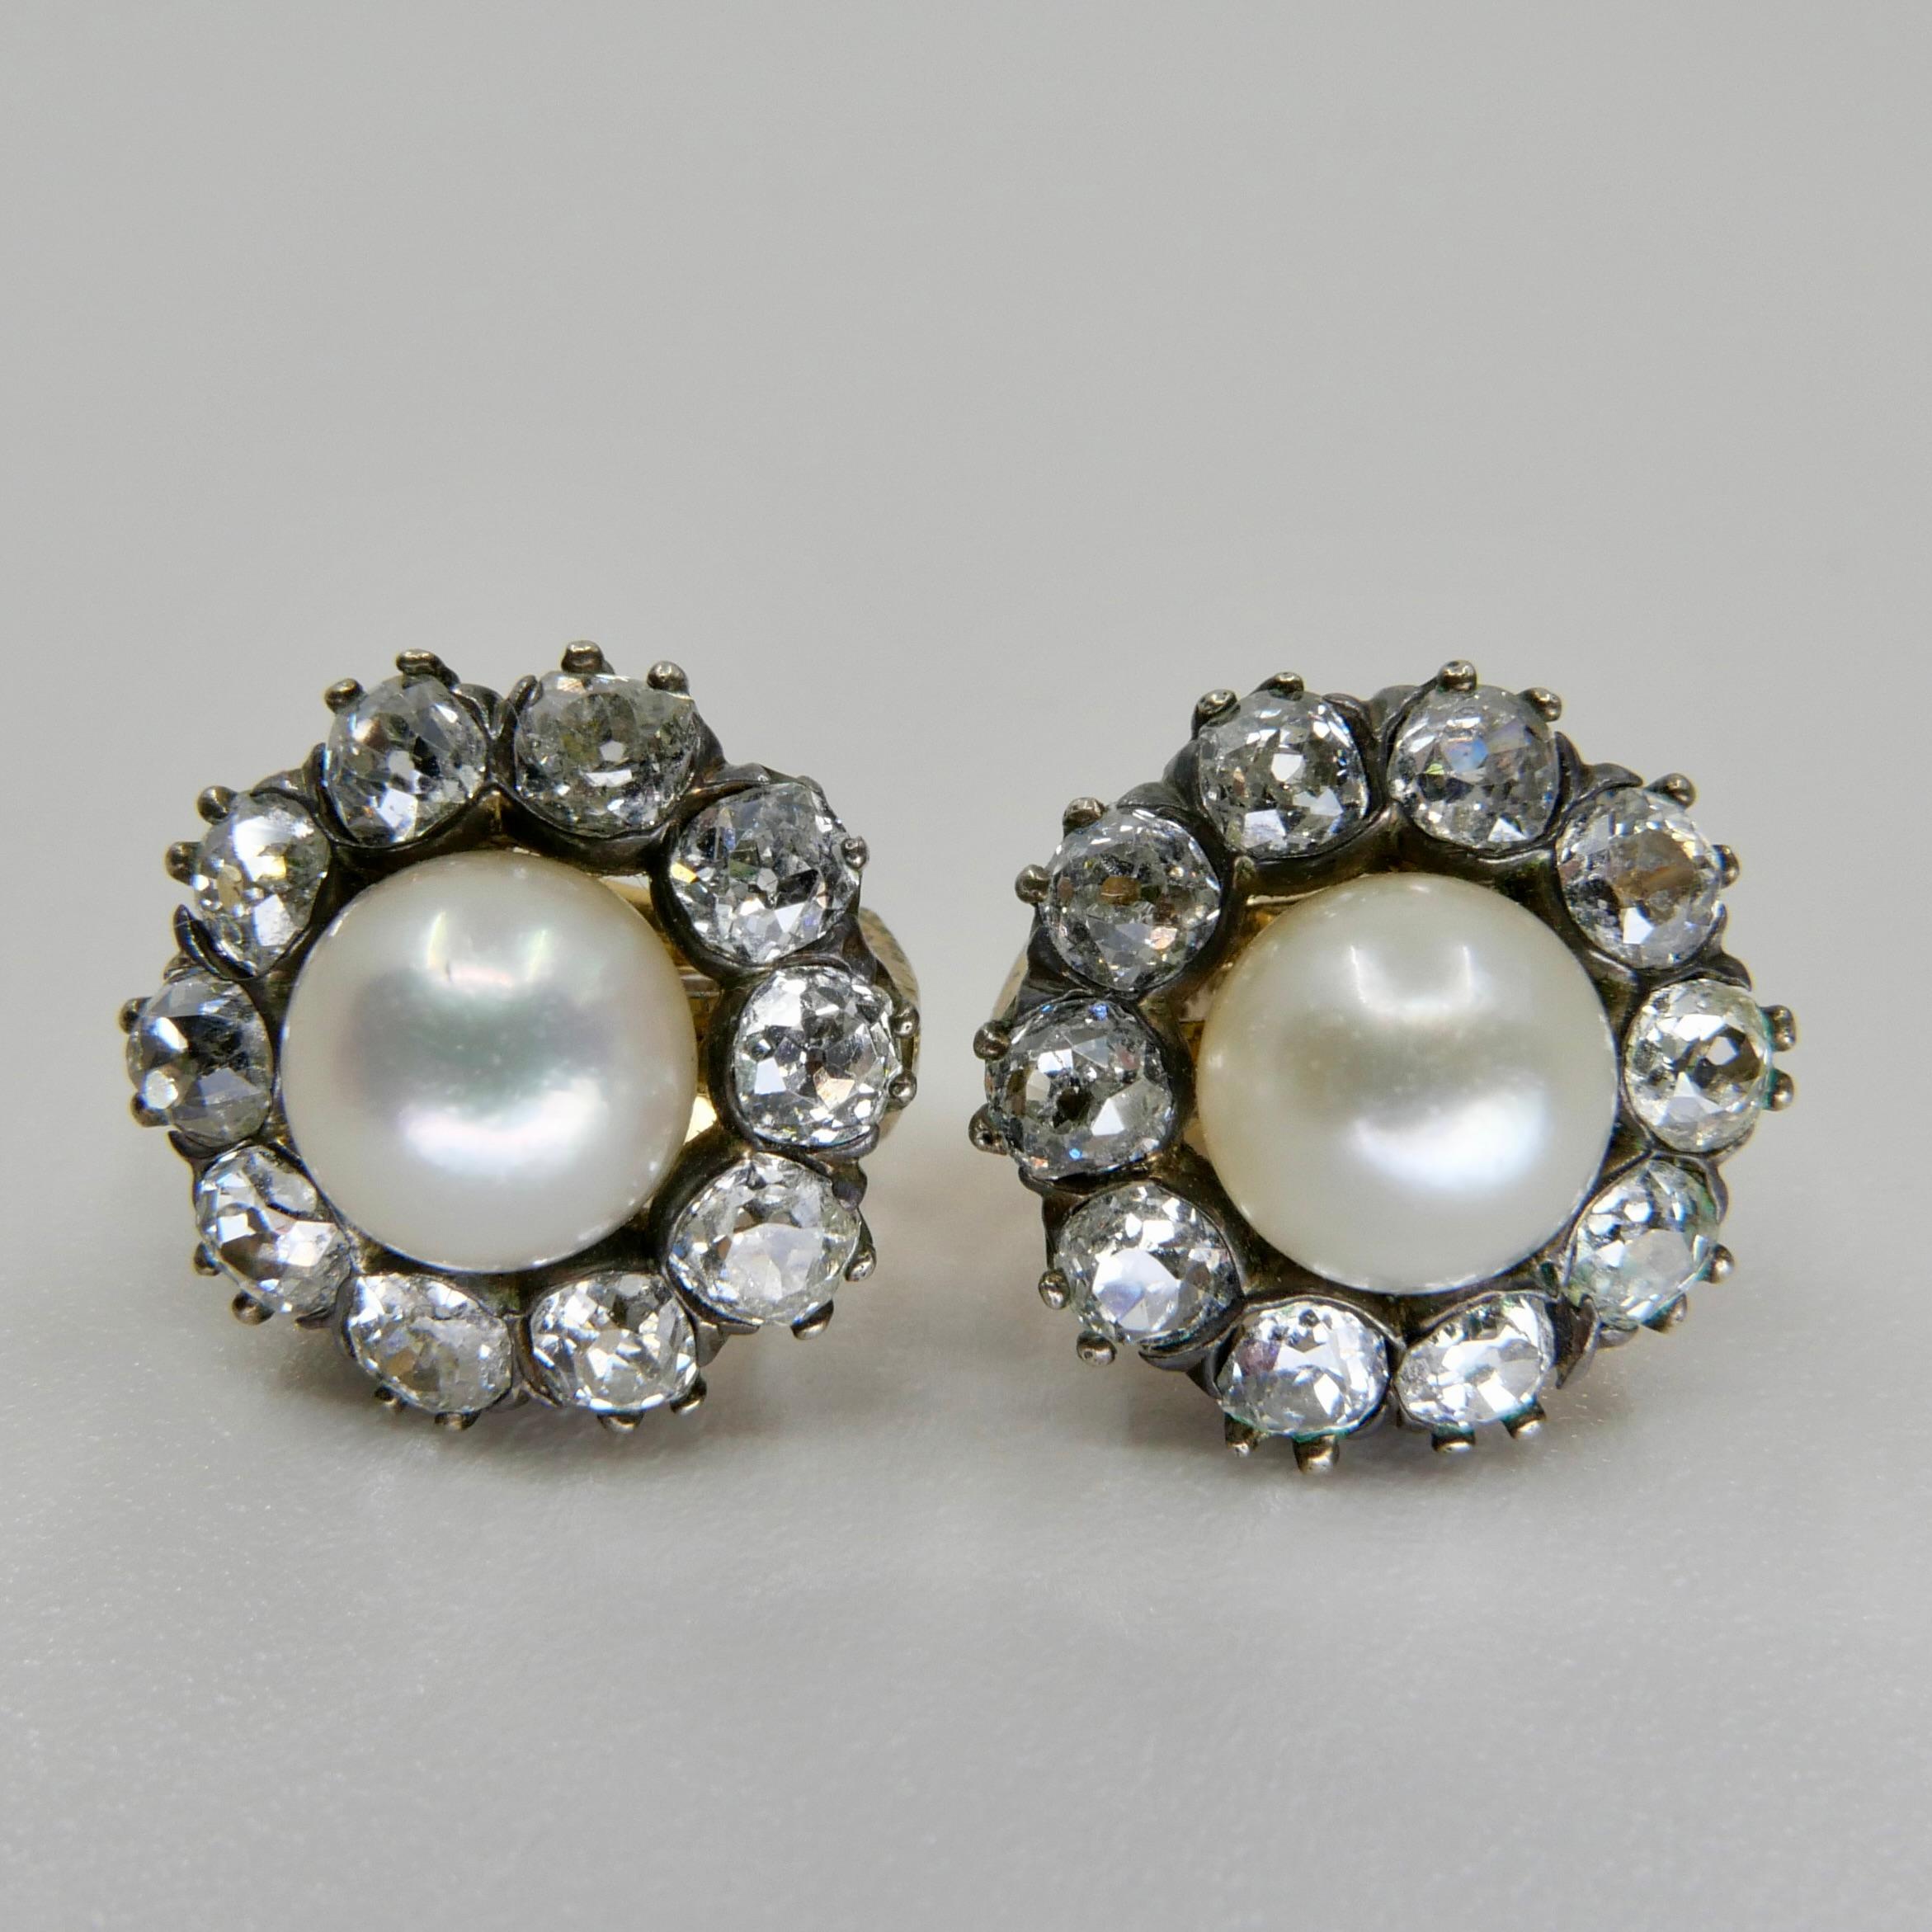 Antique Natural Pearl & Old Cut Diamond Earrings. French Assay & Maker Mark. 2